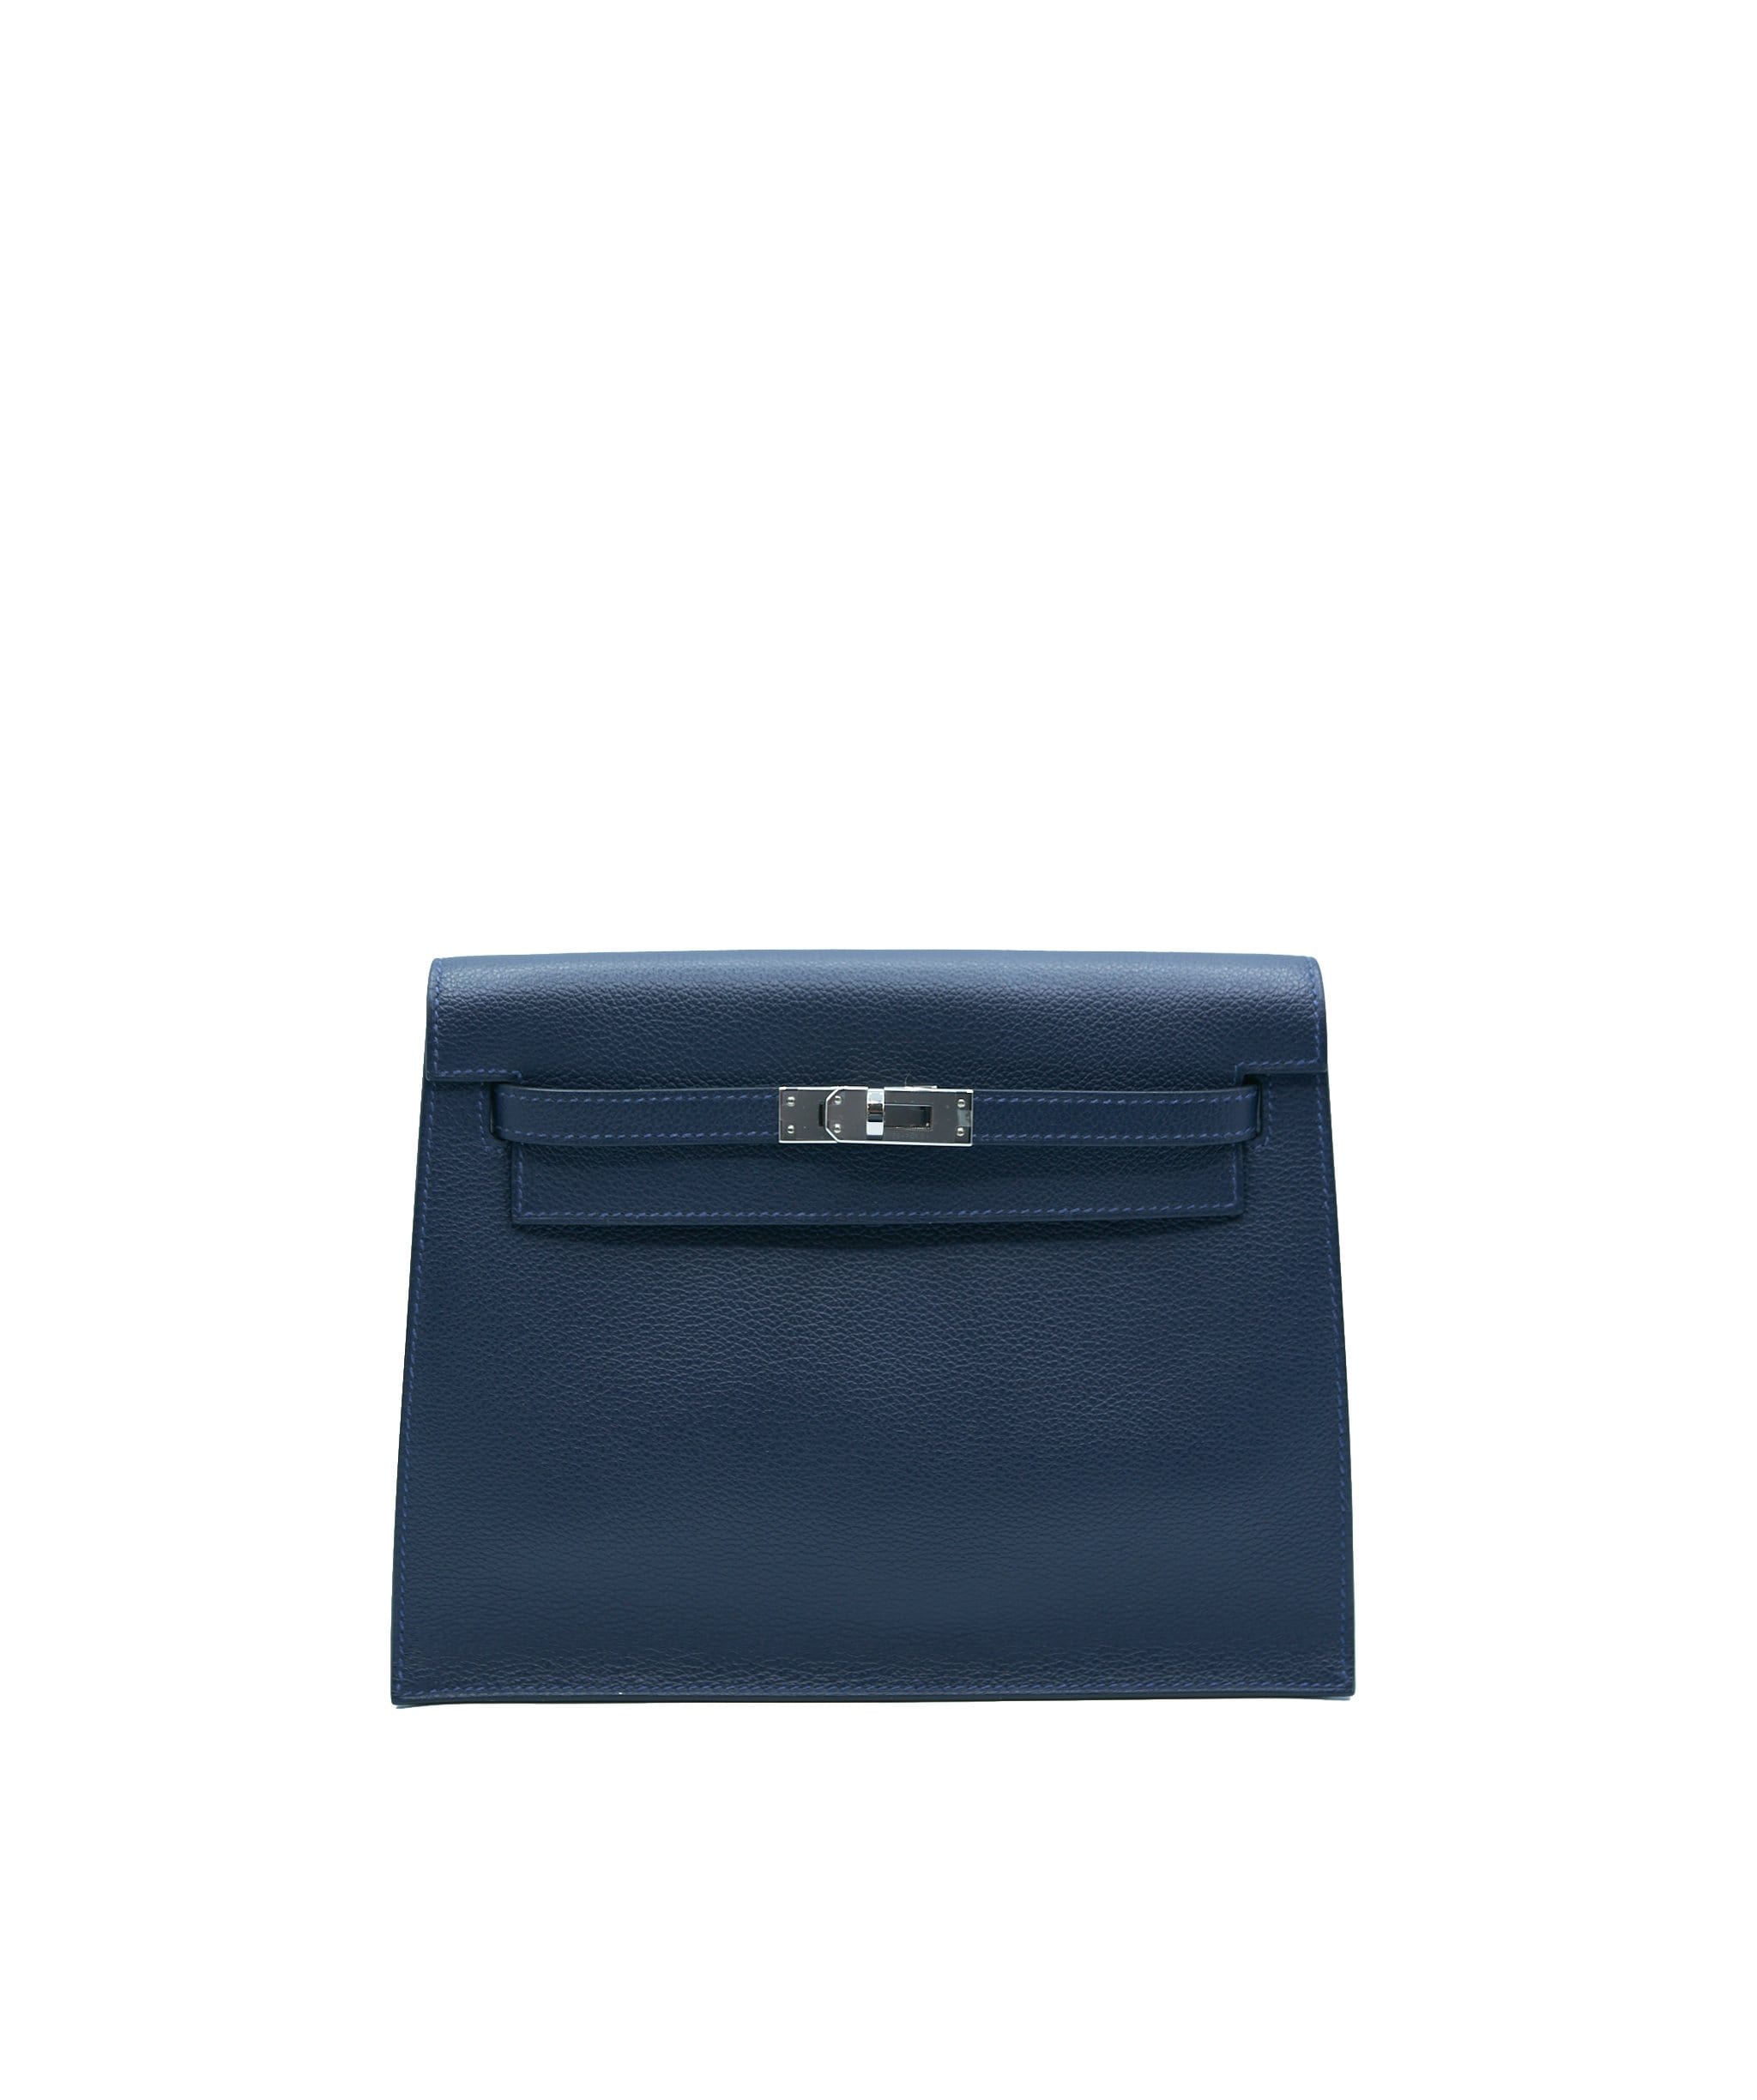 Hermès - Authenticated Kelly Danse Handbag - Leather Navy Plain for Women, Very Good Condition